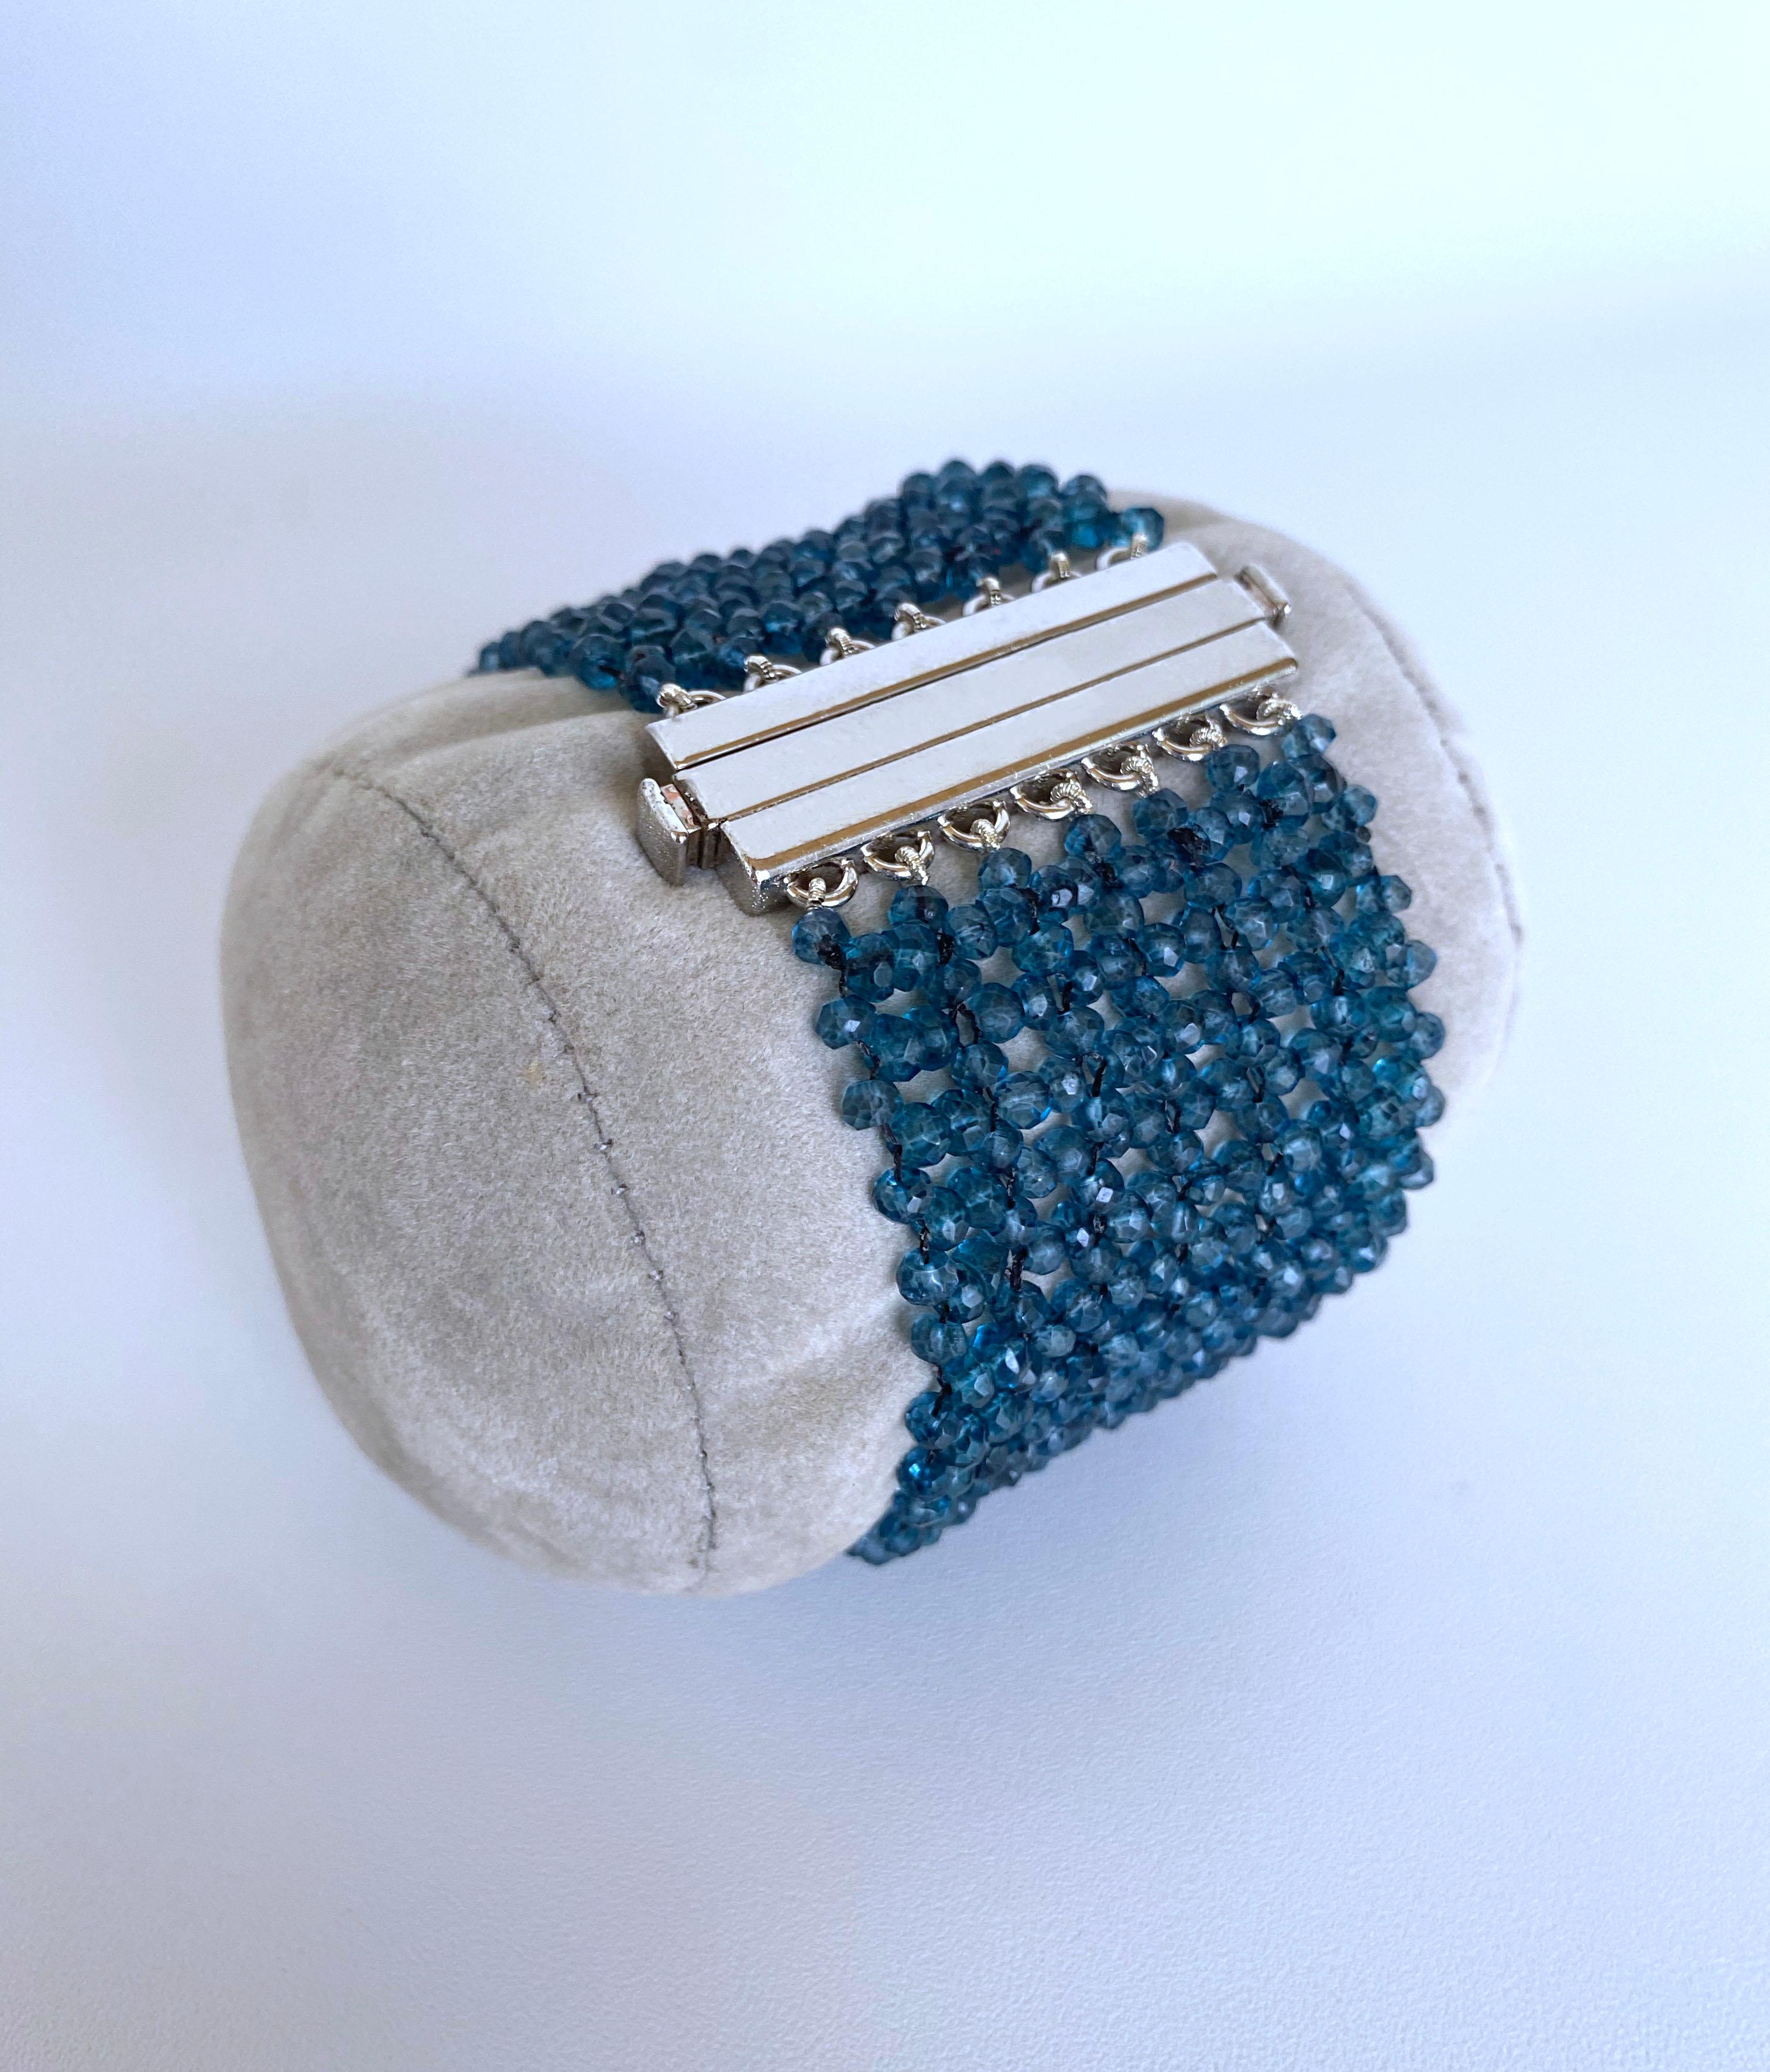 The deep blue topaz beads are woven together into a 1.25-inch wide bracelet. The shimmer of topaz beads is highlighted by the silver press clasp. This rhodium-plated silver clasp is also very secure and easy to use clasp. The clean lines of the